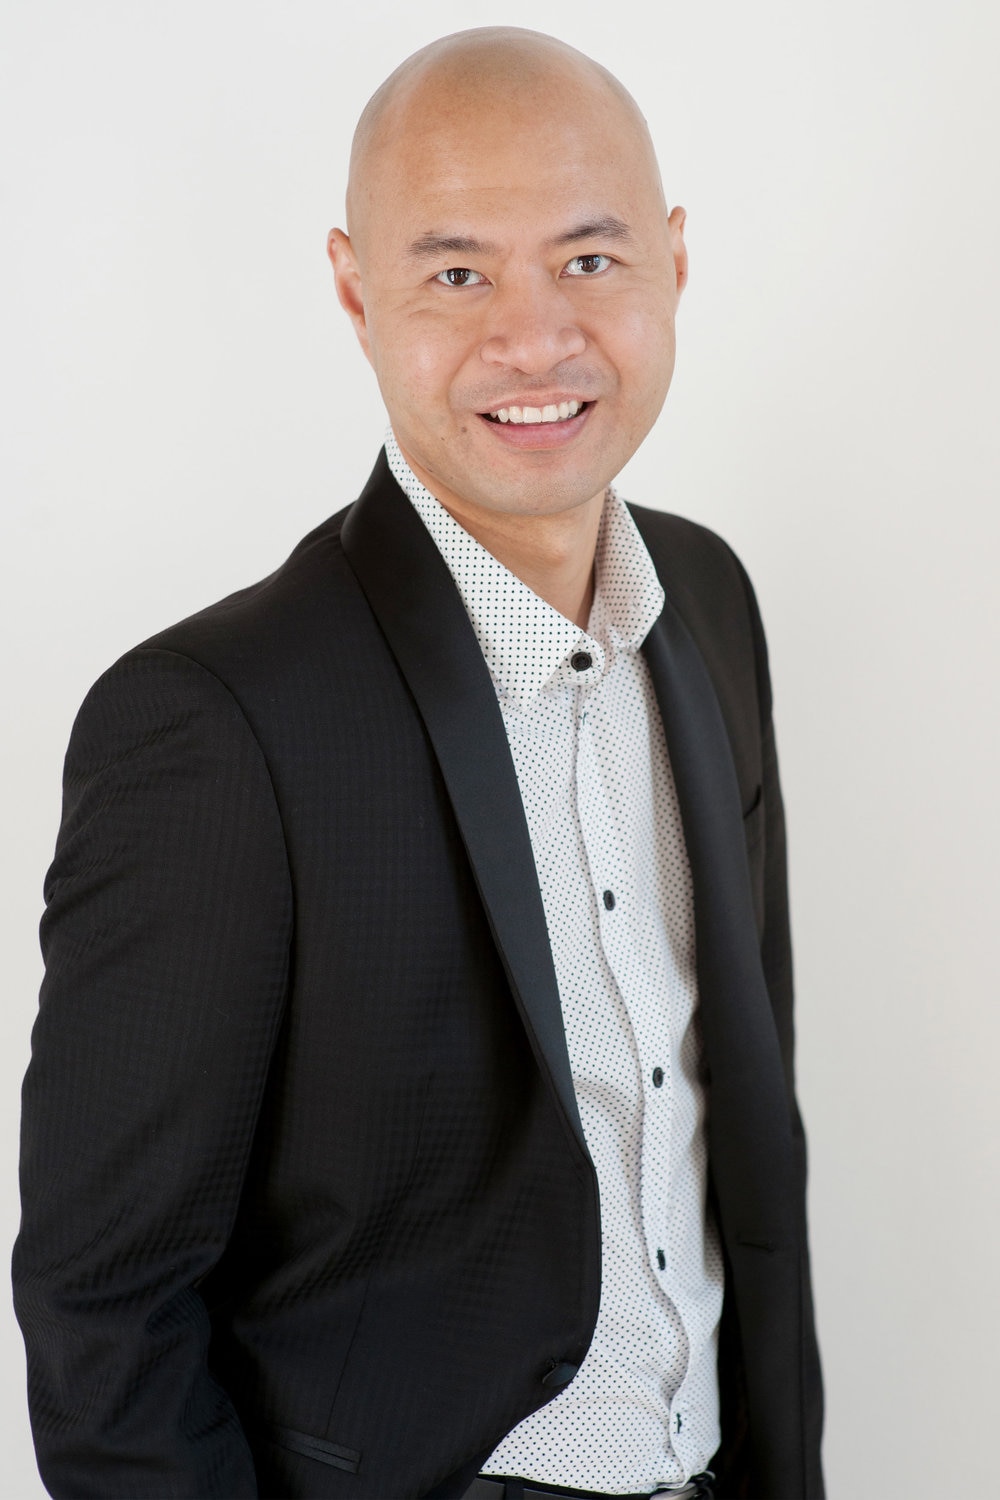 Dr Stefan Lo has been practising cosmetic medicine for about 10 years.